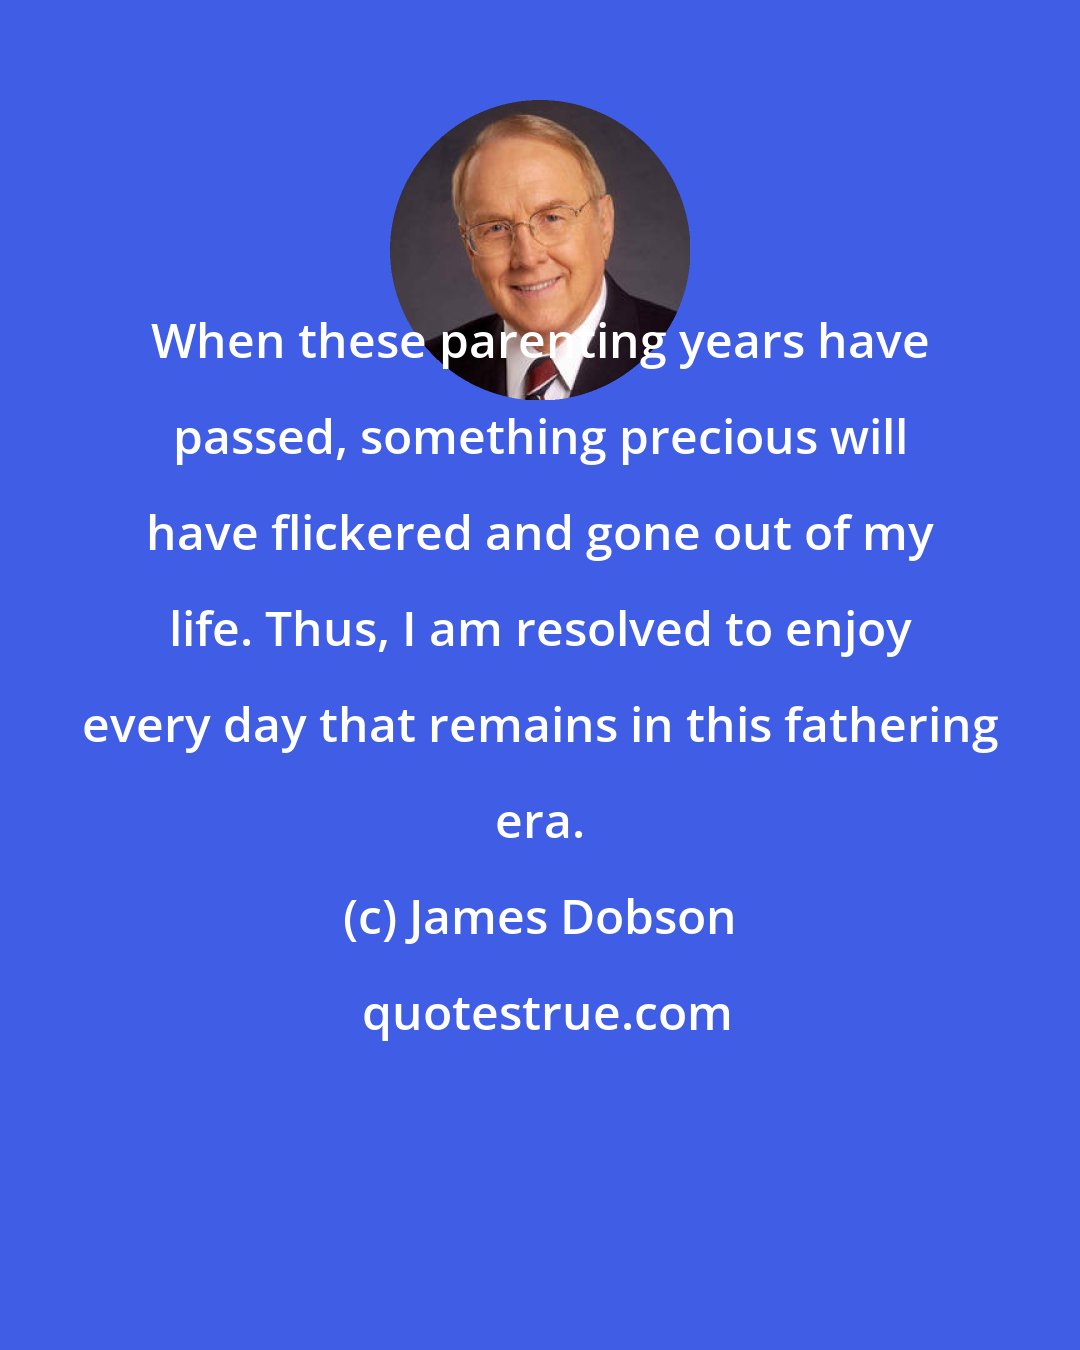 James Dobson: When these parenting years have passed, something precious will have flickered and gone out of my life. Thus, I am resolved to enjoy every day that remains in this fathering era.